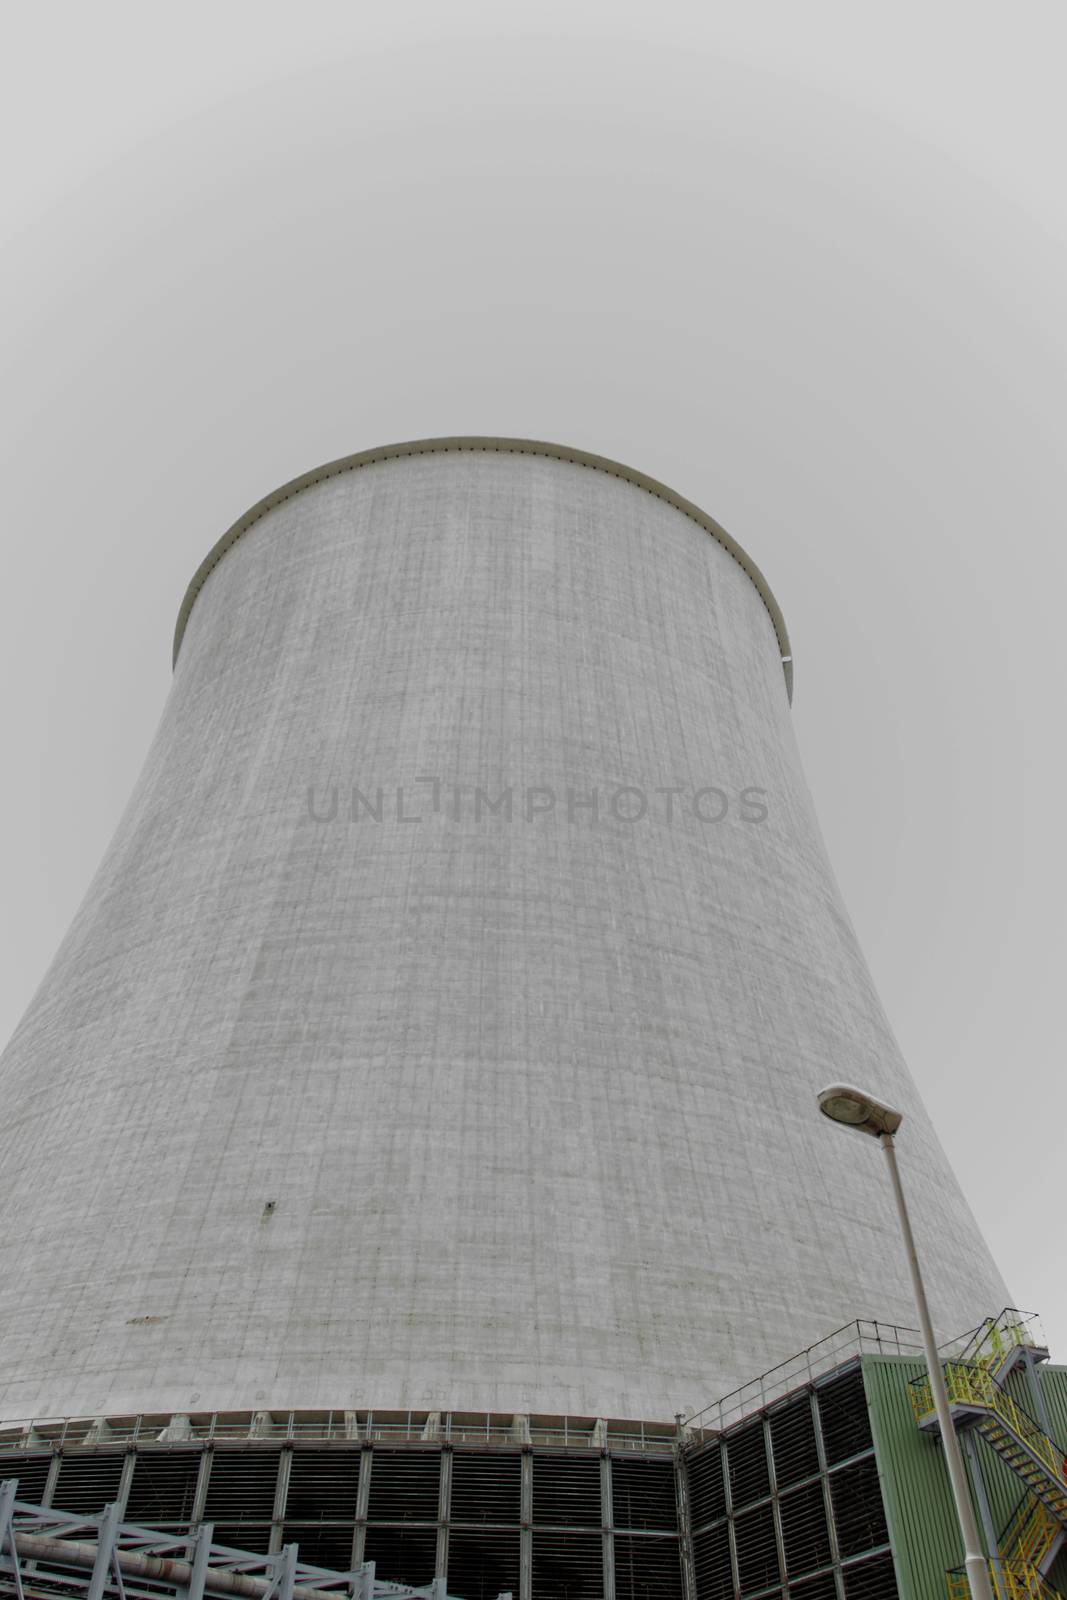 Cooling towers of a power plant by NagyDodo